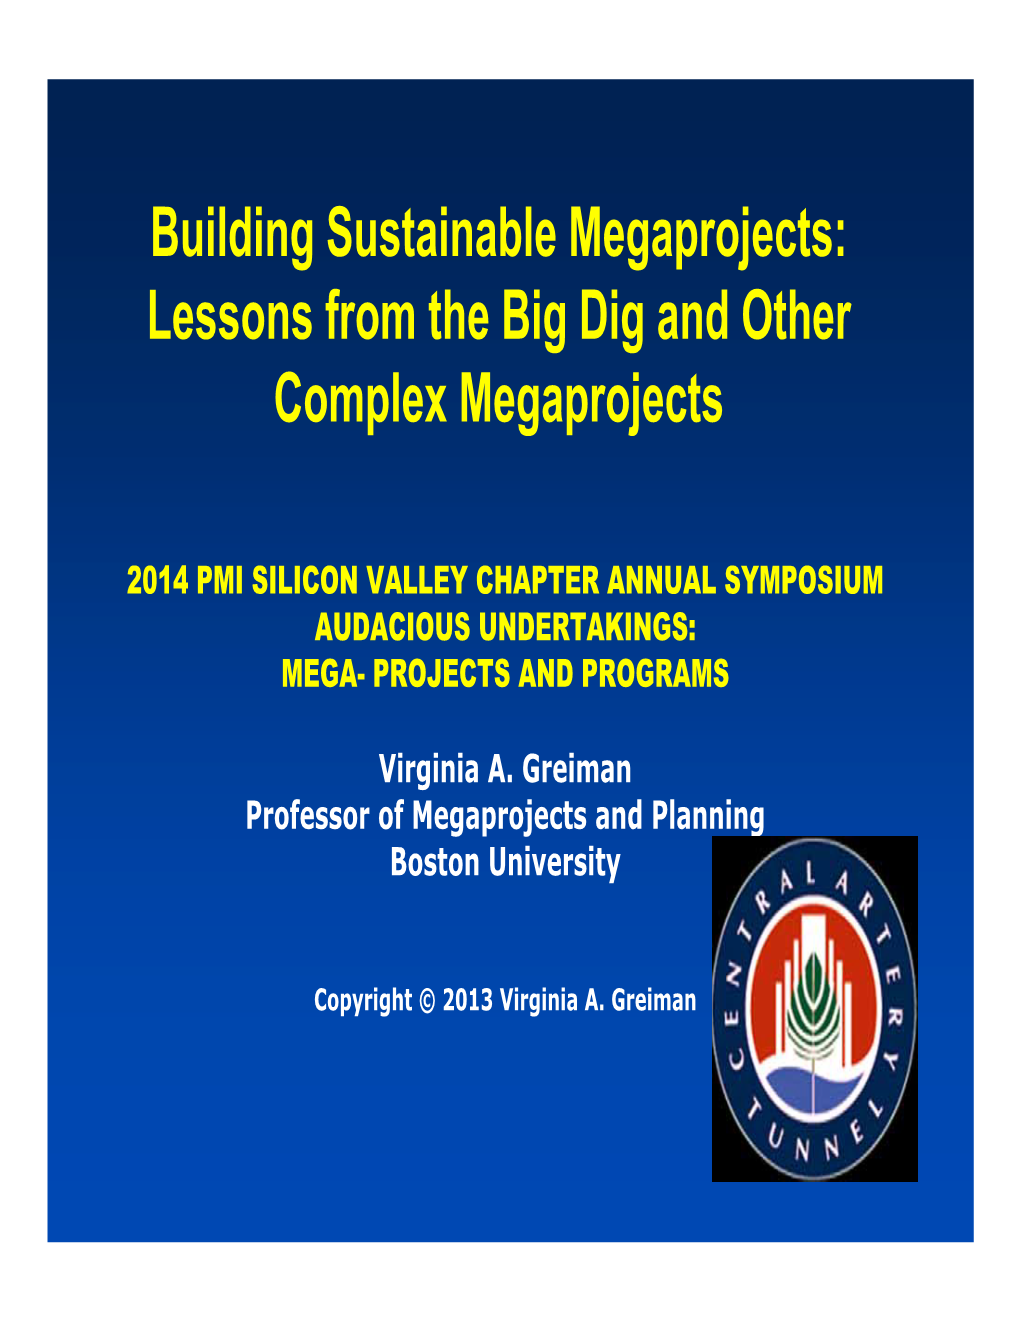 Building Sustainable Megaprojects: Lessons from the Big Dig and Other Complex Megaprojects